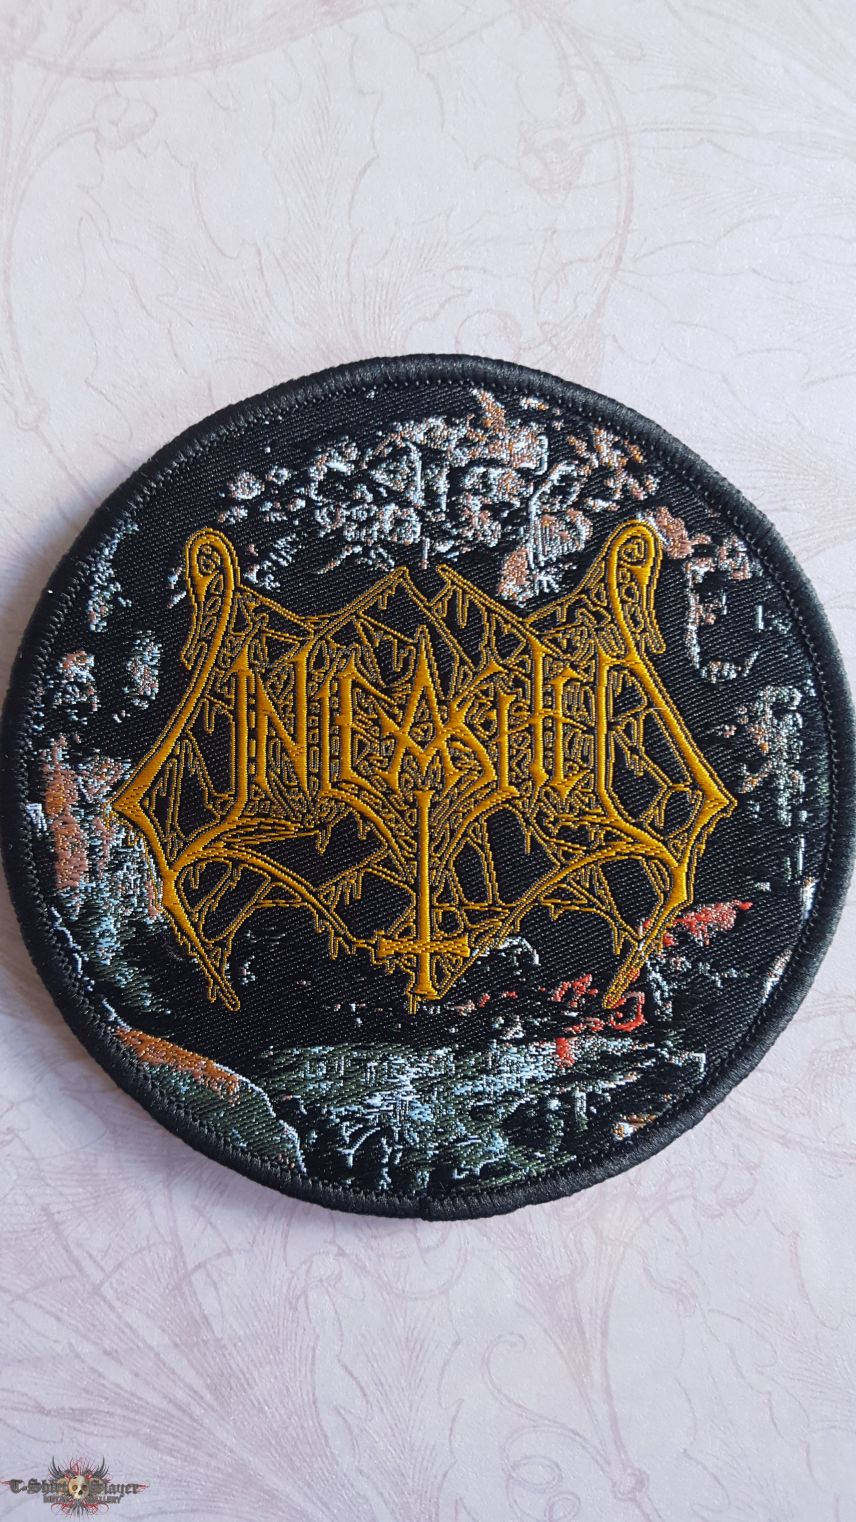 UNLEASHED circle patch 